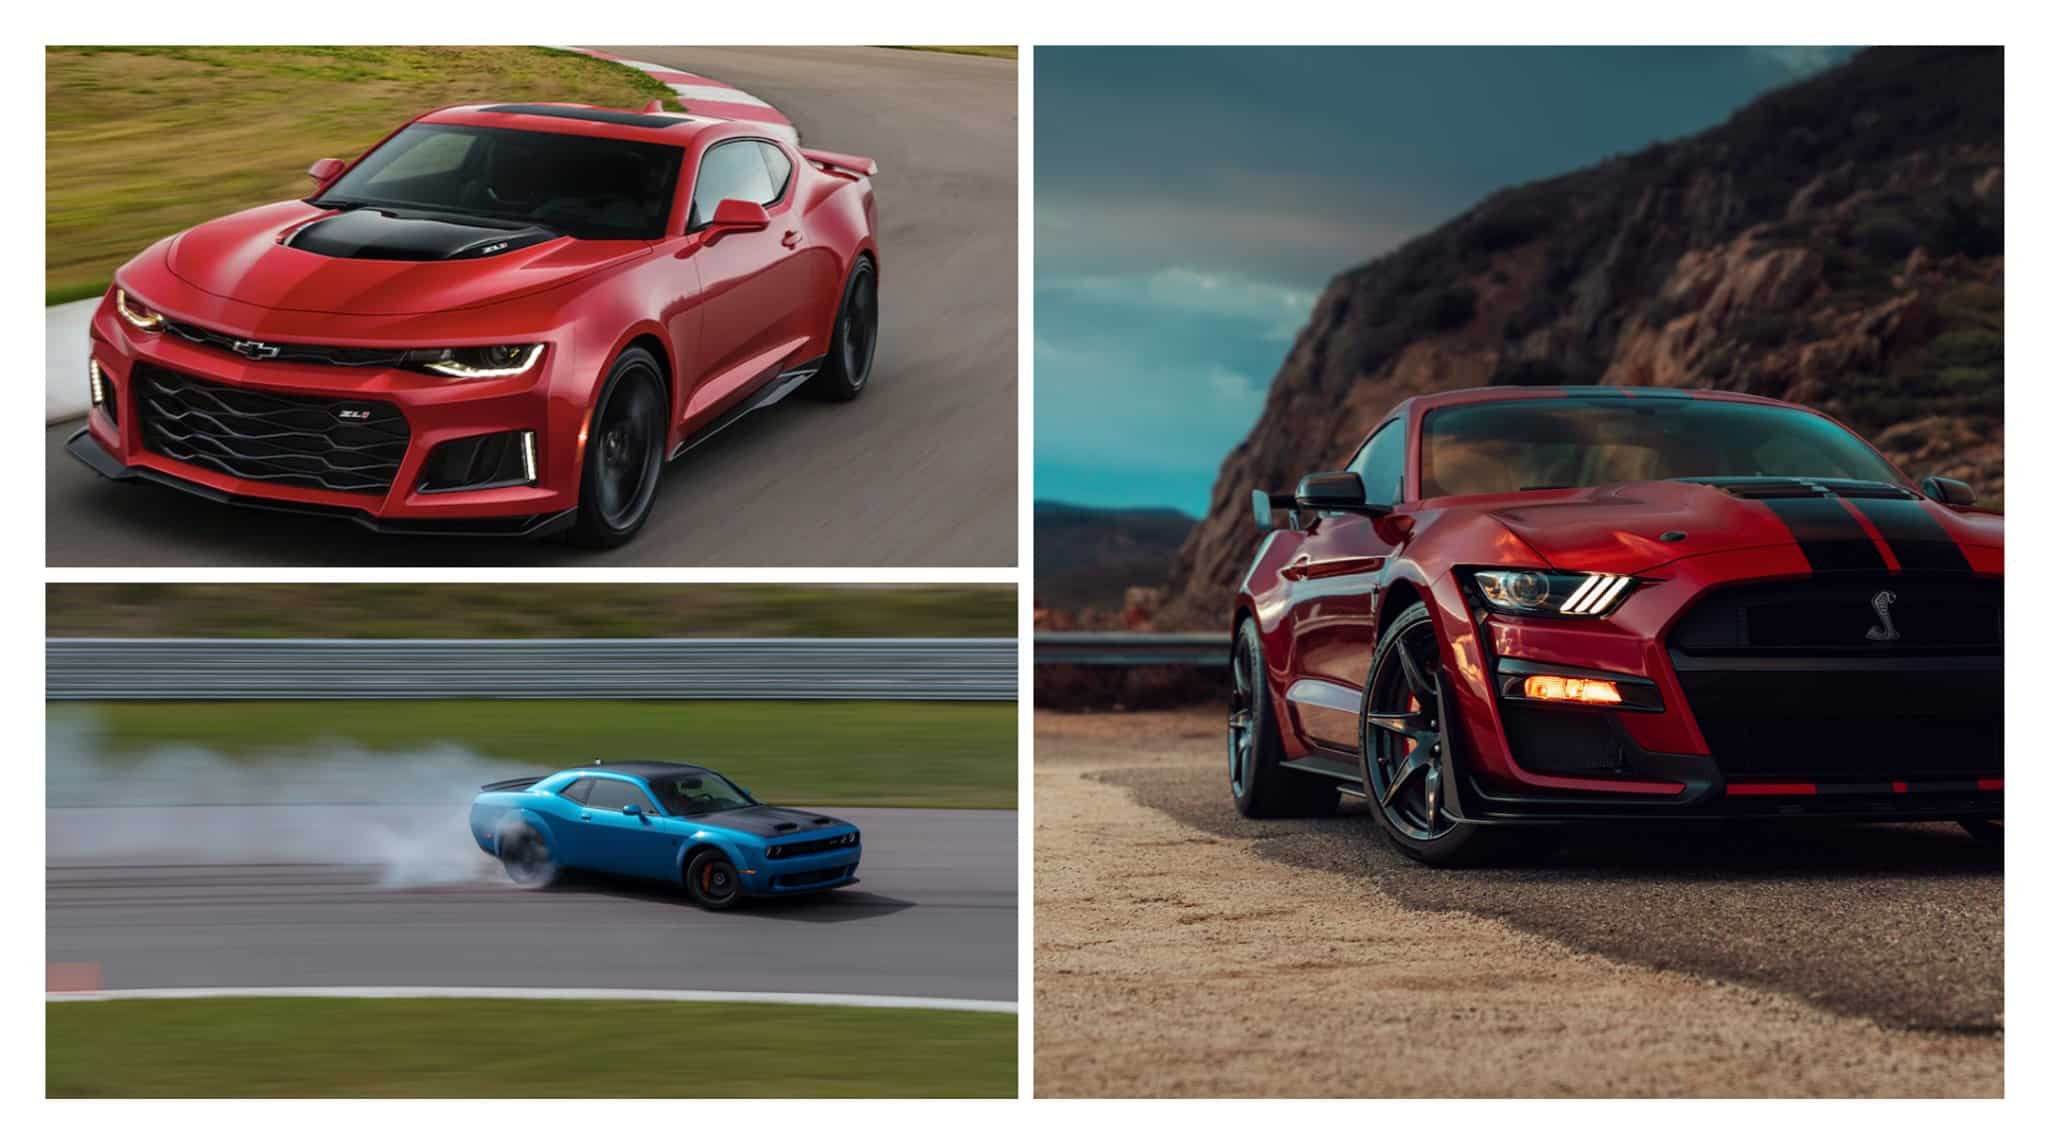 American muscle comparativa Shelby GT500 - Challenger Redeye y Camaro ZL1-jpg